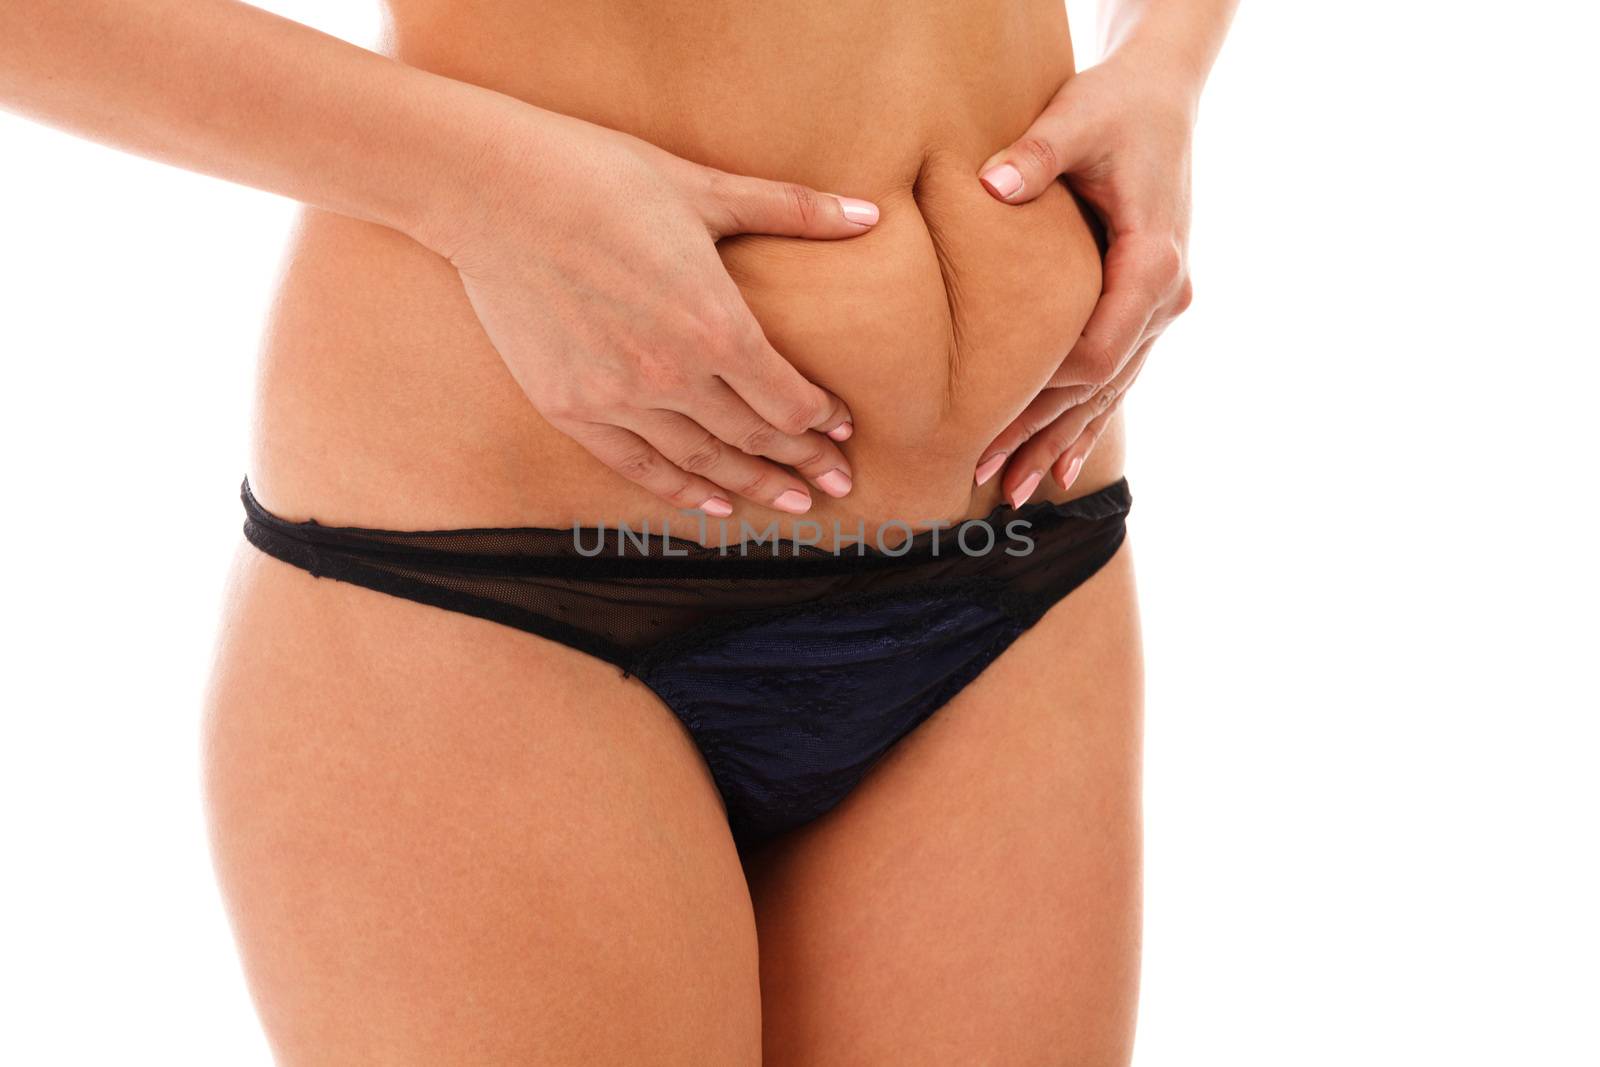 Closeup shot of overweight woman pinching her excessive belly fat, isolated on white background